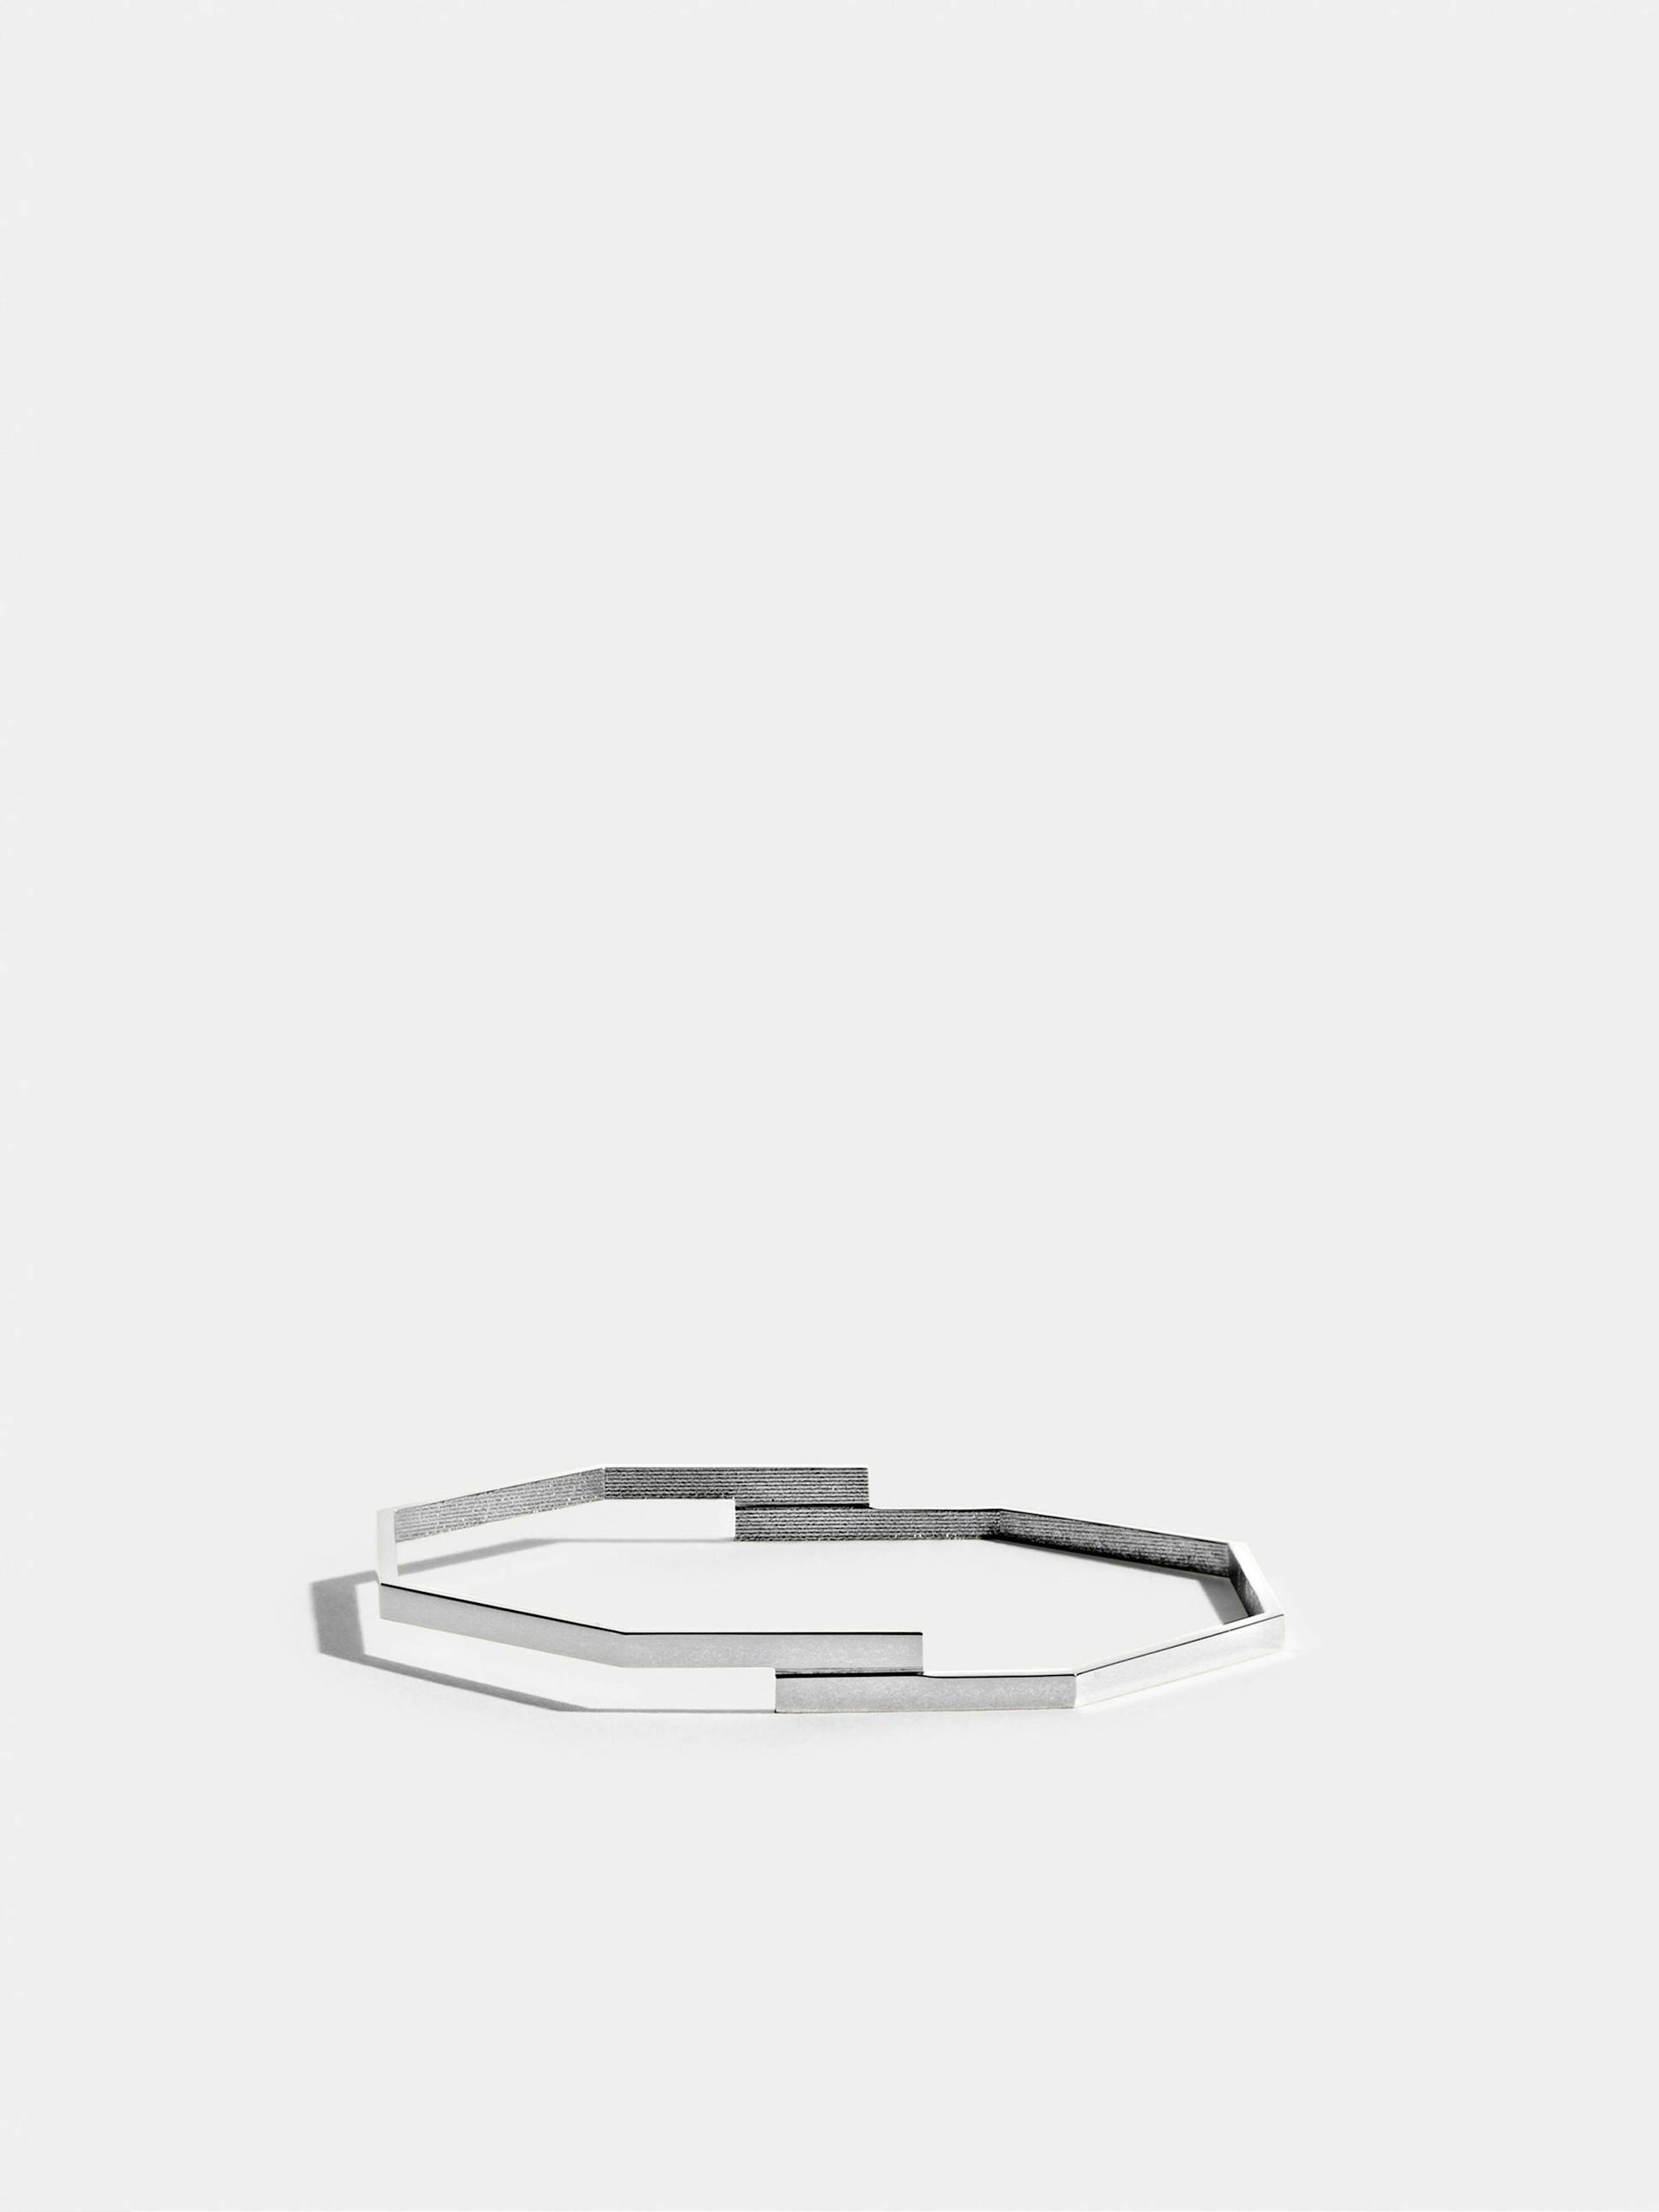 Octogone double bangle in 18k Fairmined ethical white gold